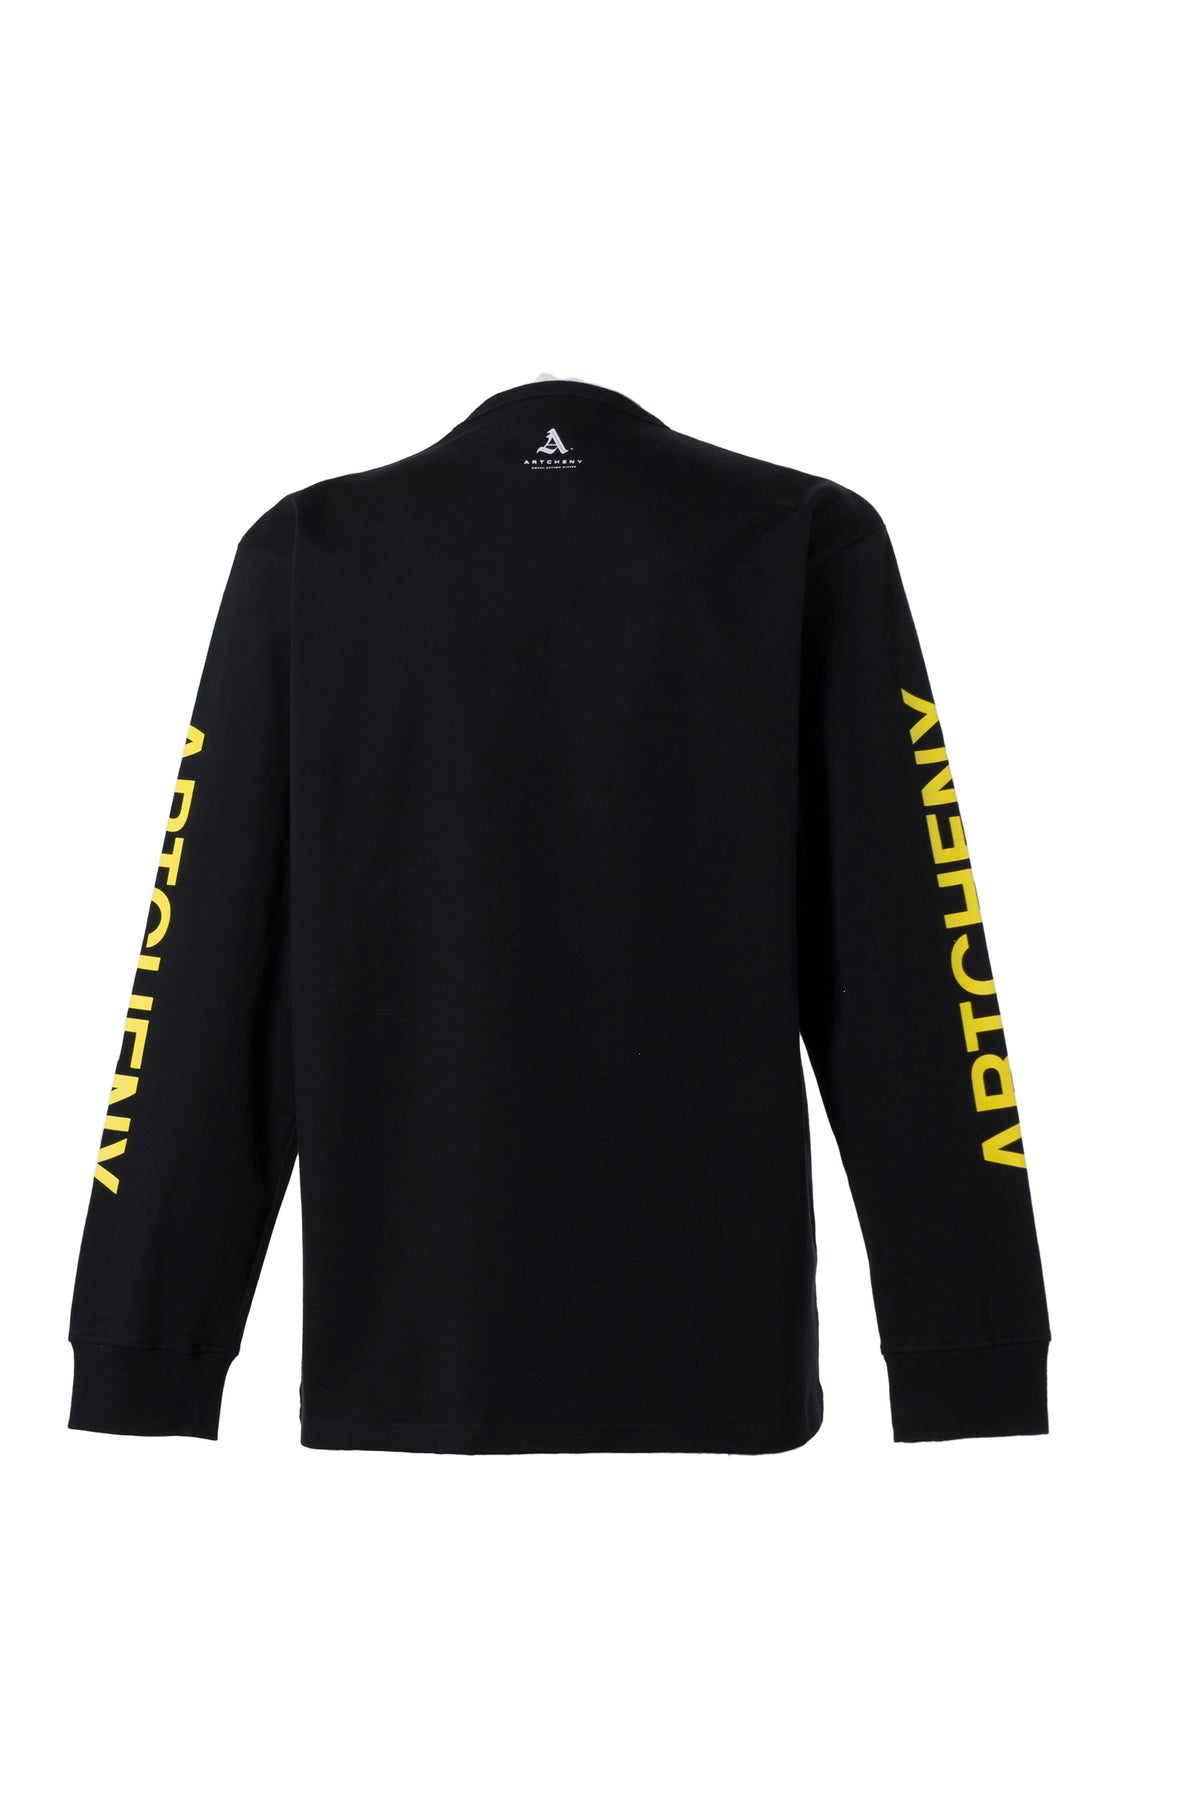 ARTCHENY LONG SLEEVE T-SHIRTS NIGHTMARE / BLK